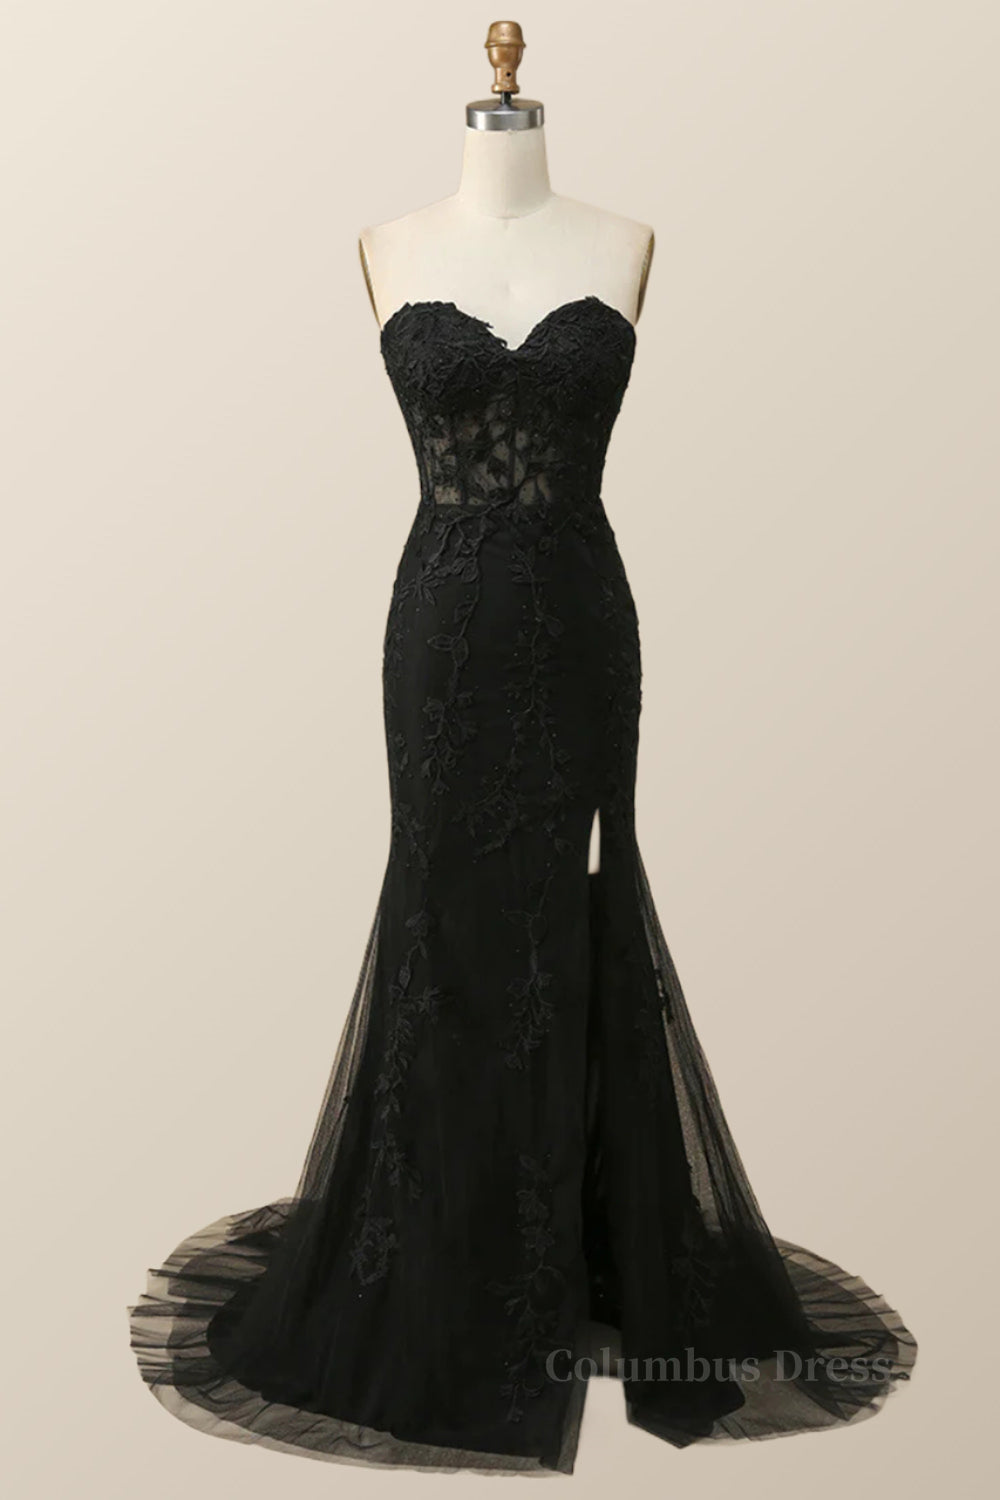 Strapless Black Lace Mermaid Long Corset Prom Dress outfits, Evening Dress Shop